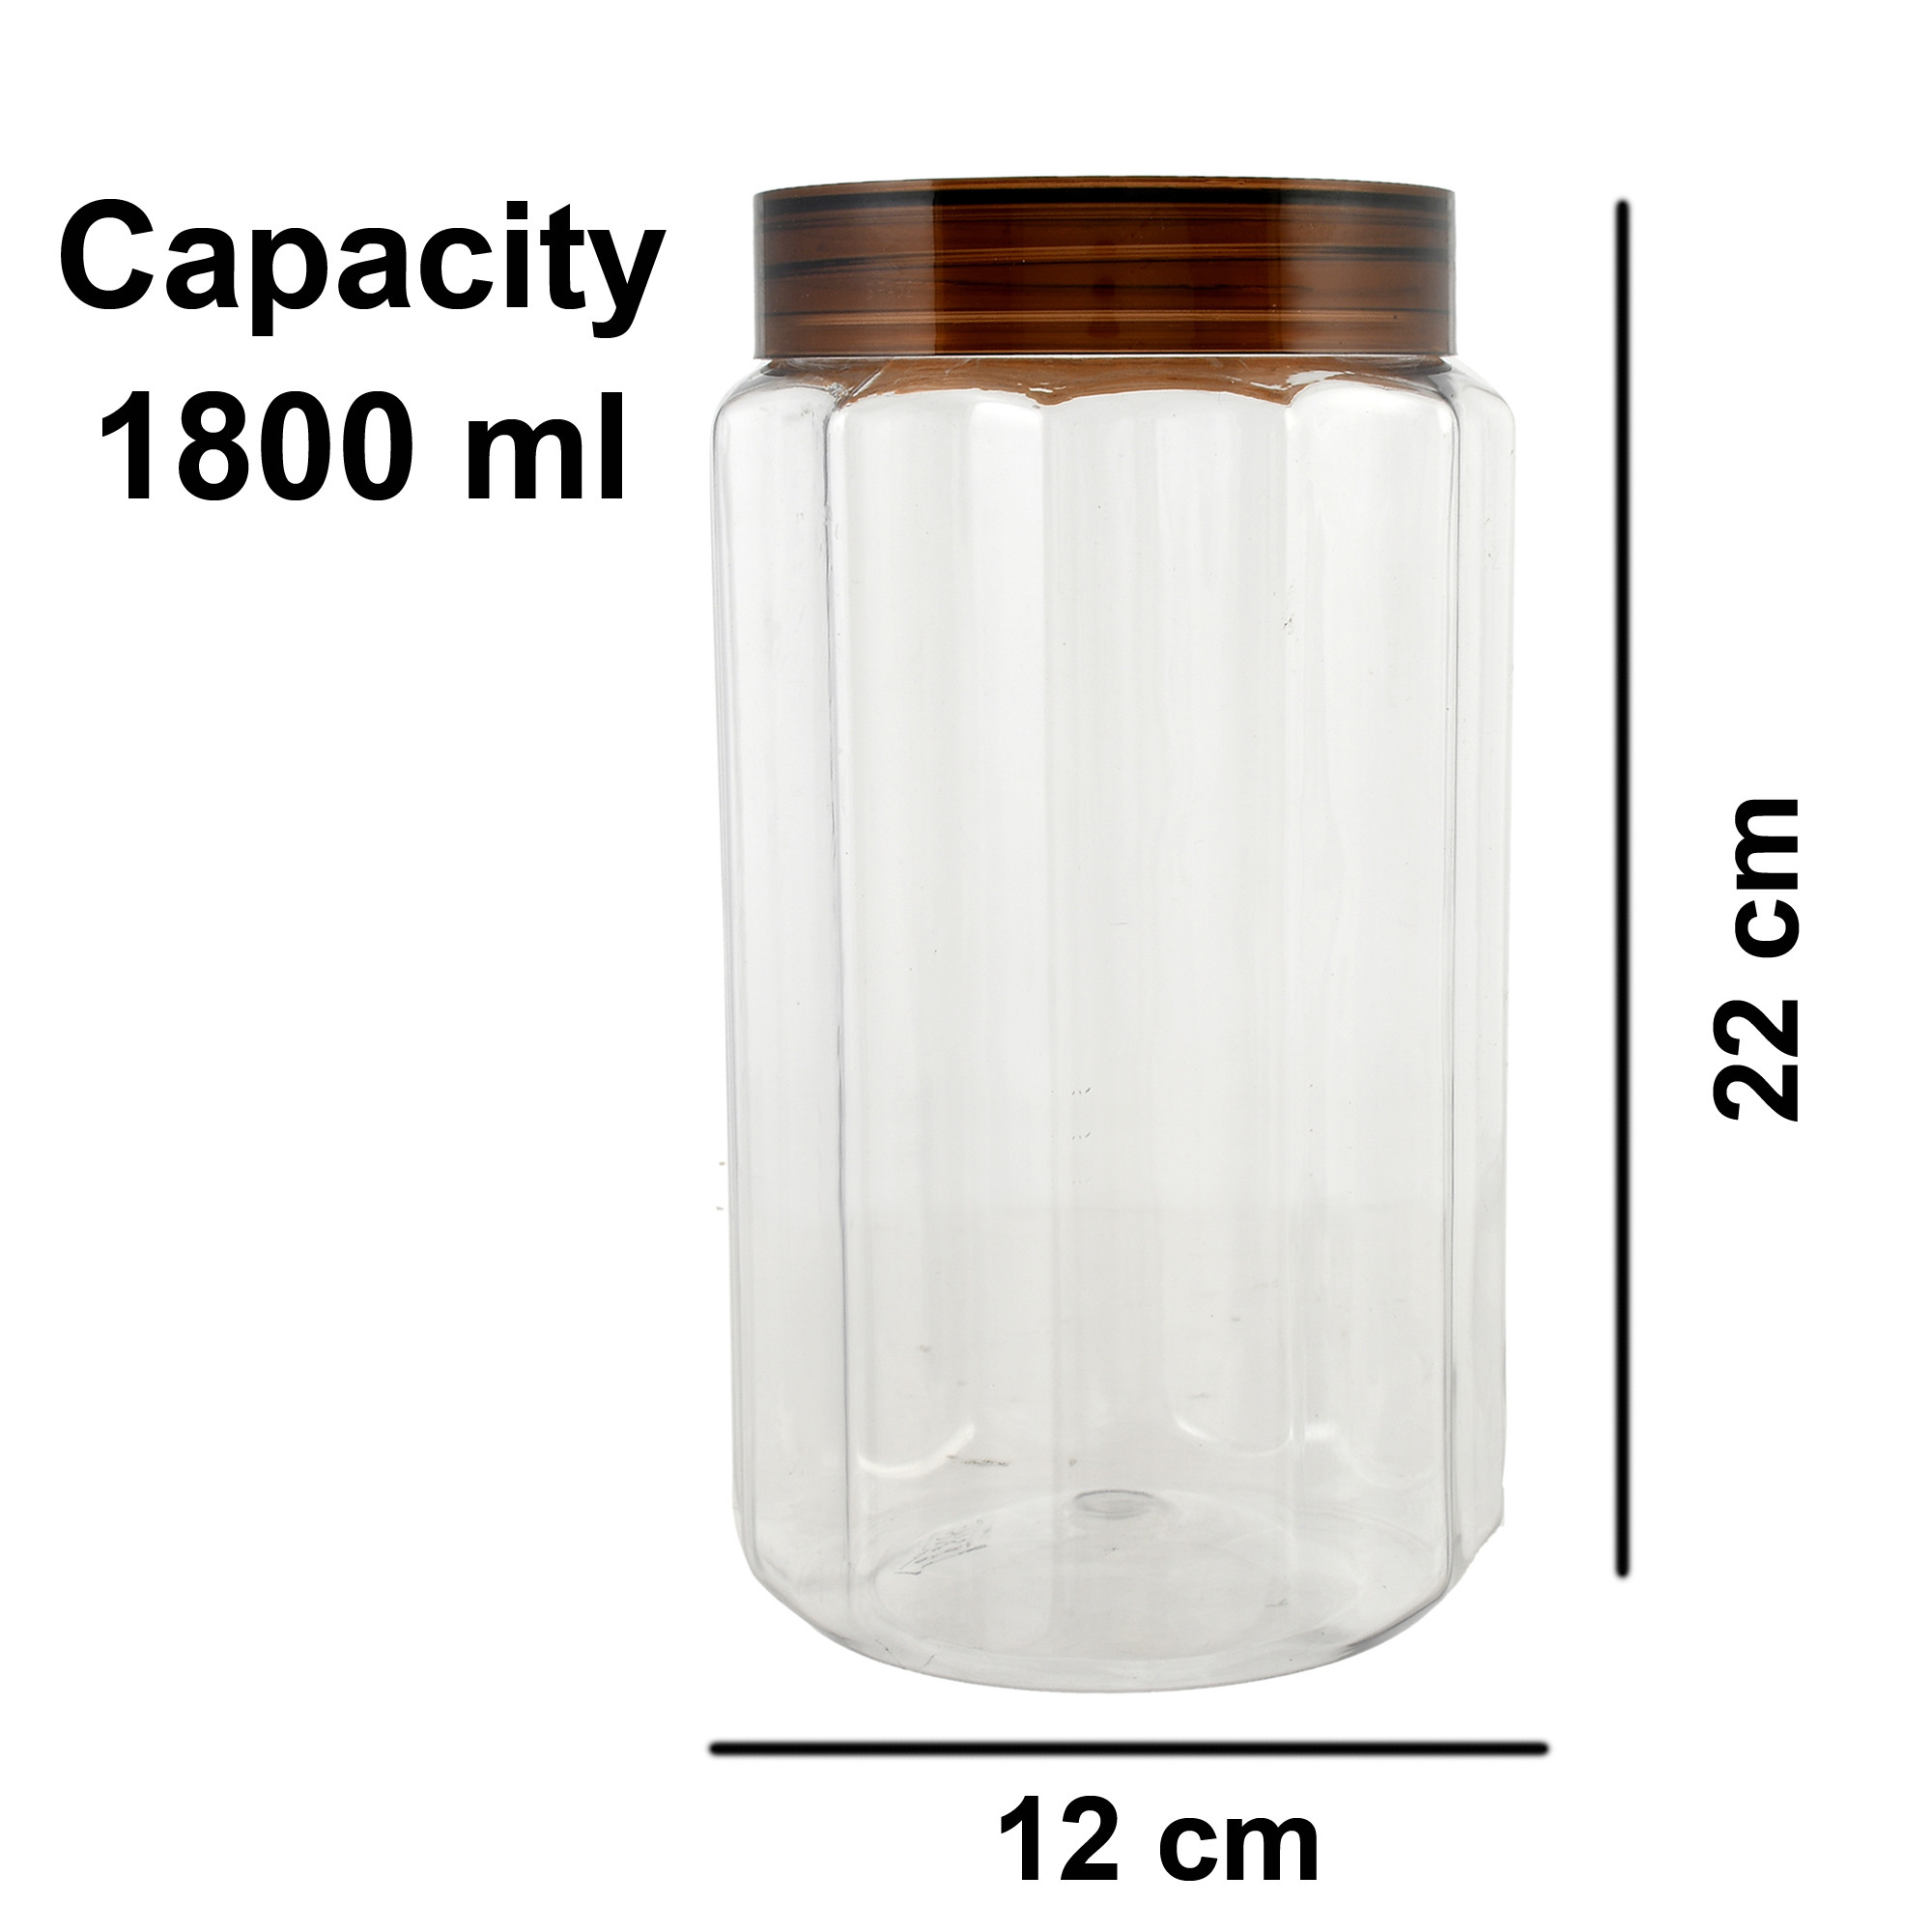 Kuber Industries Opal Airtight Food Storage Containers Kitchen Containers for Storage Set Plastic Storage Box for Kitchen Airtight Containers Storage Jar Set for Kitchen Storage (Set Of 6,1500,1800 ml, Brown)